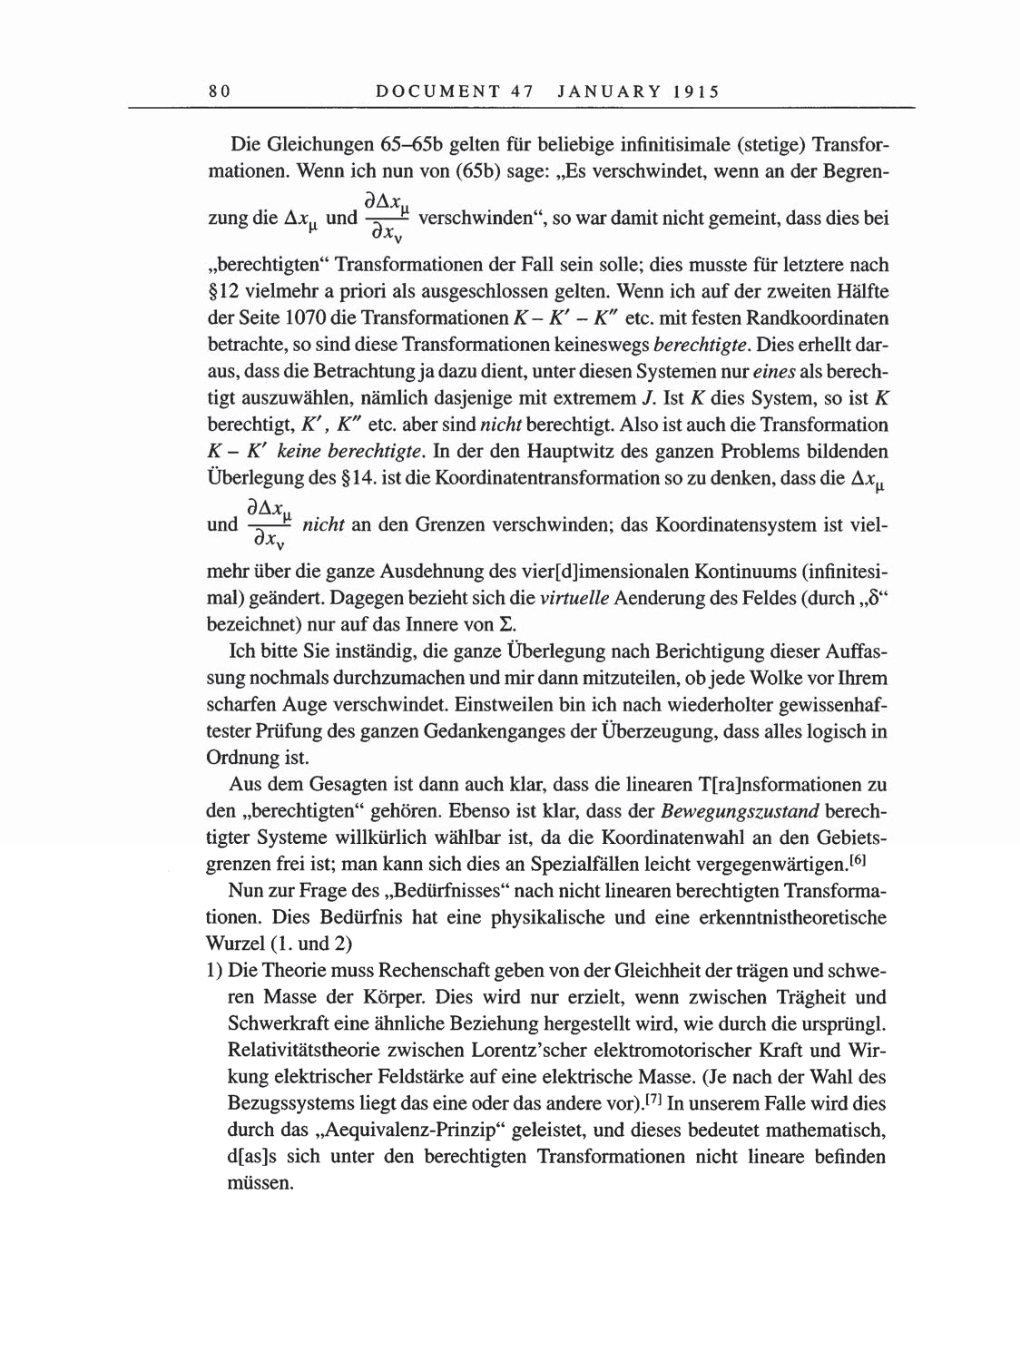 Volume 8, Part A: The Berlin Years: Correspondence 1914-1917 page 80